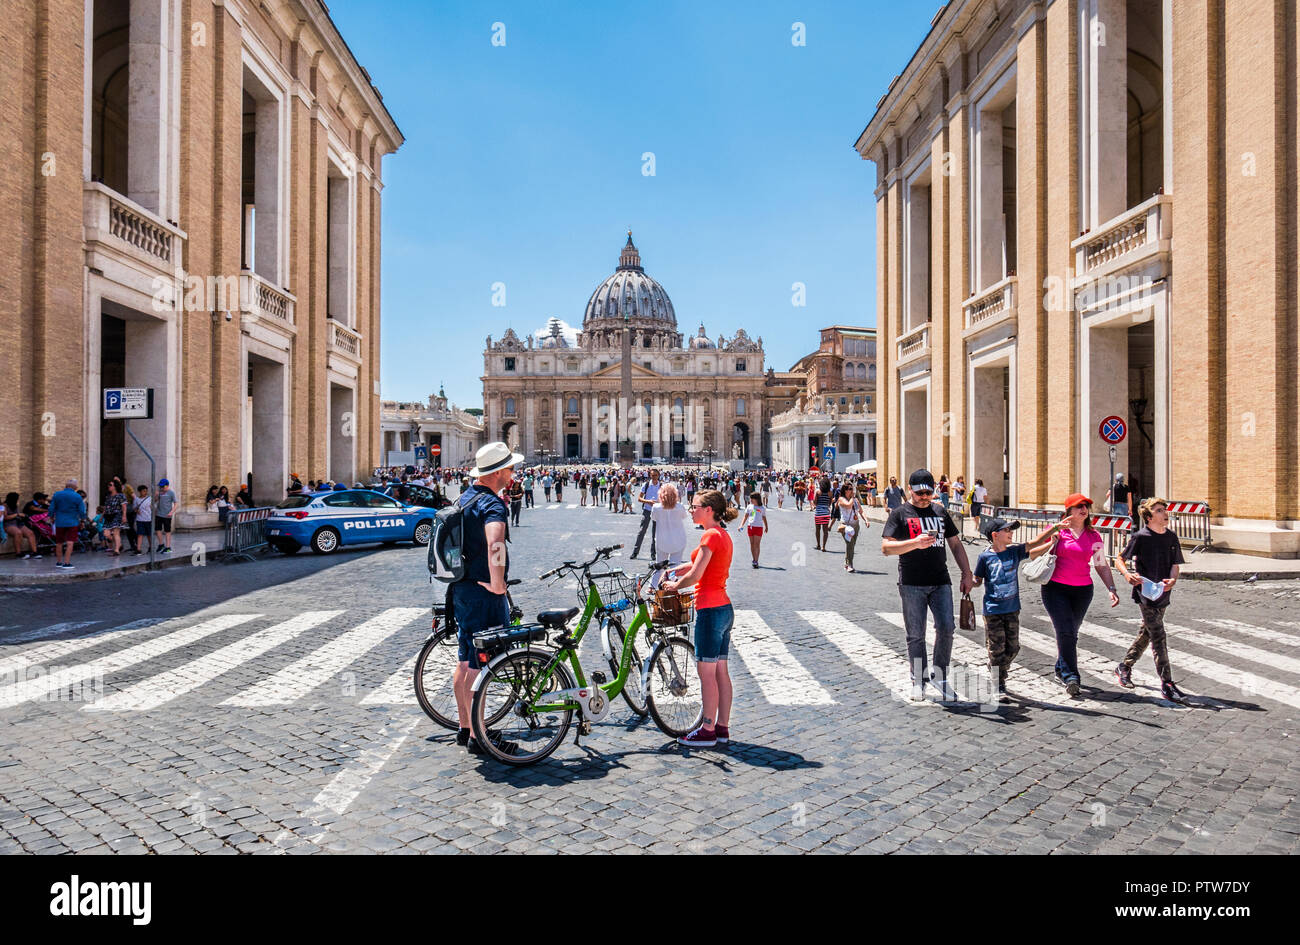 cyclists at Via Conciliazione, Rome, which leads into Vatican City, St. Peter's Square and towards St. Peter's Basilica Stock Photo